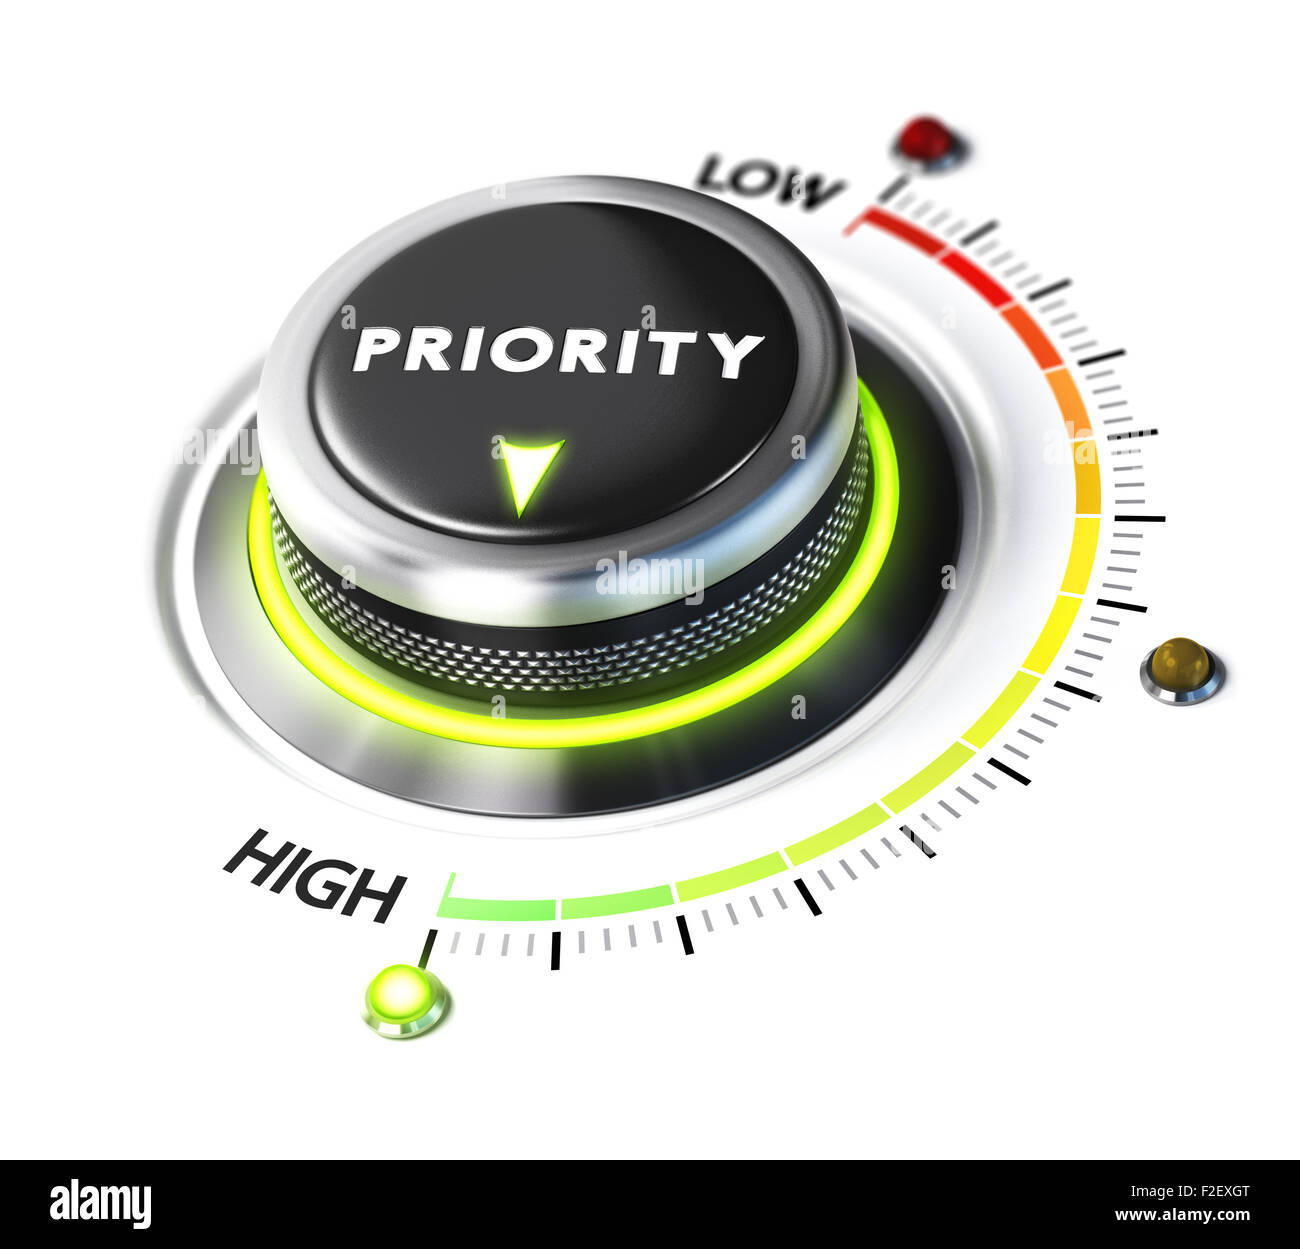 Priority switch button positioned on highest level, white background and green light. Conceptual image for illustration of setti Stock Photo